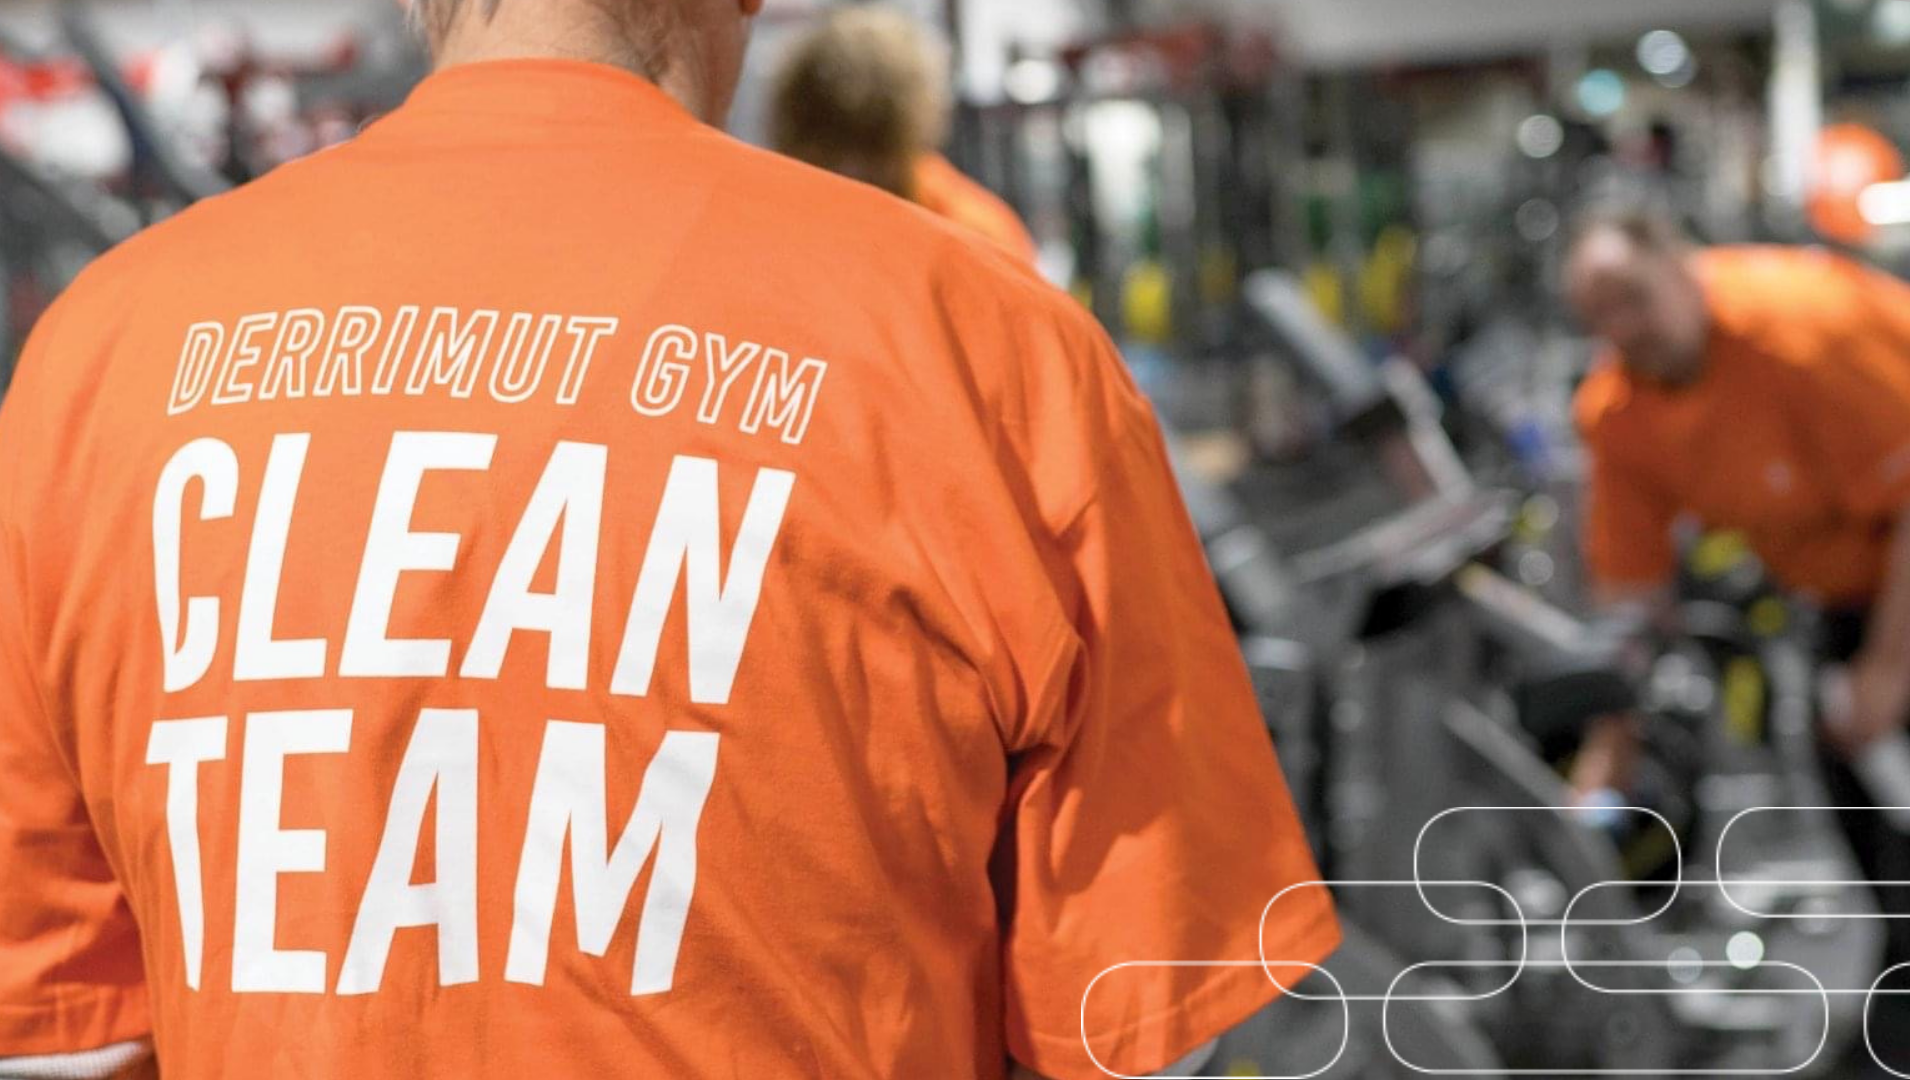 A man wearing an orange t-shirt with the words "of the Derrimut clean team" on it